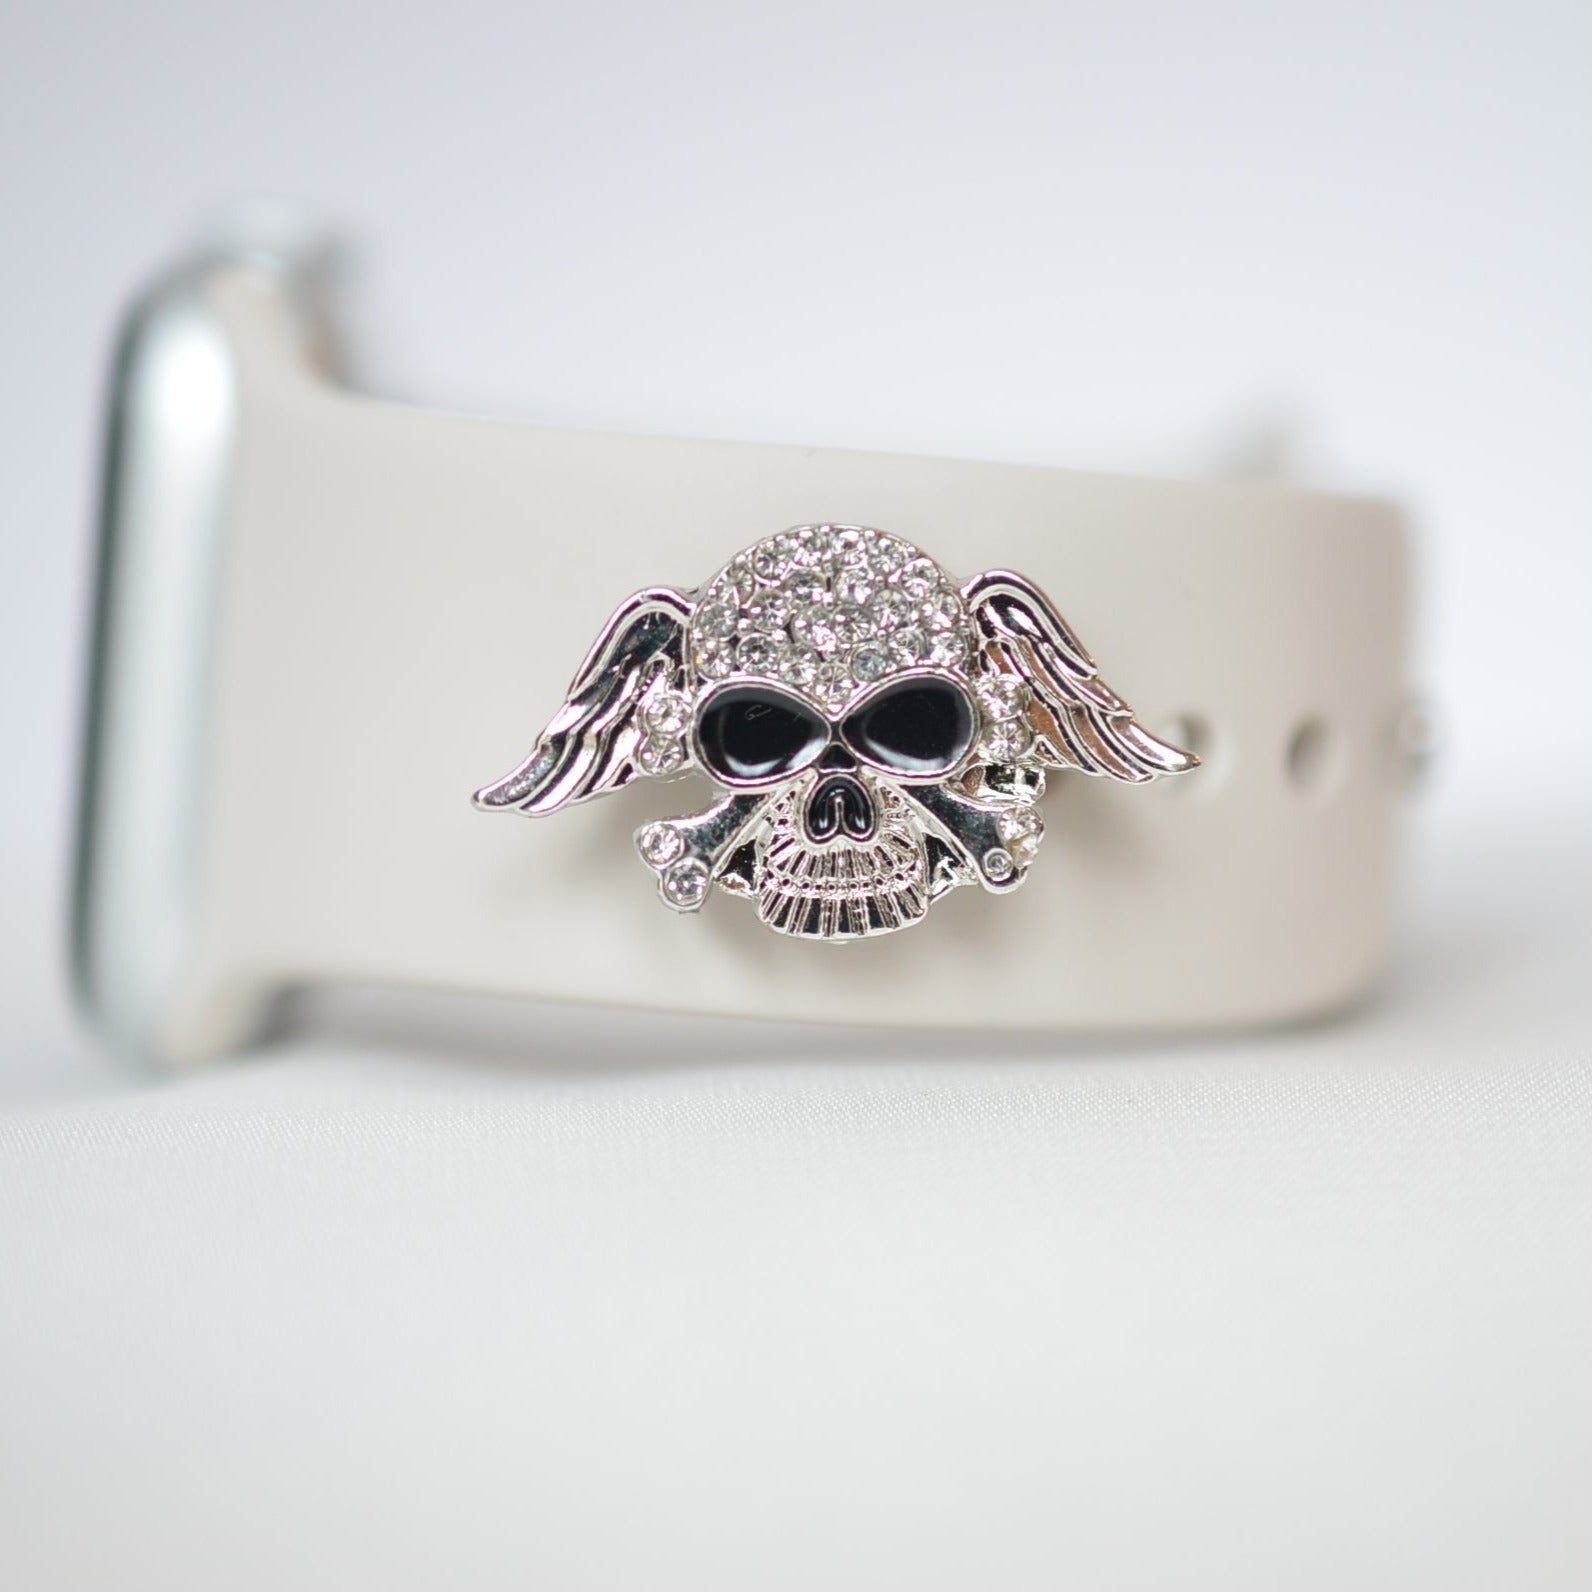 Skull Charm for Belts, Bags and Watch Bands